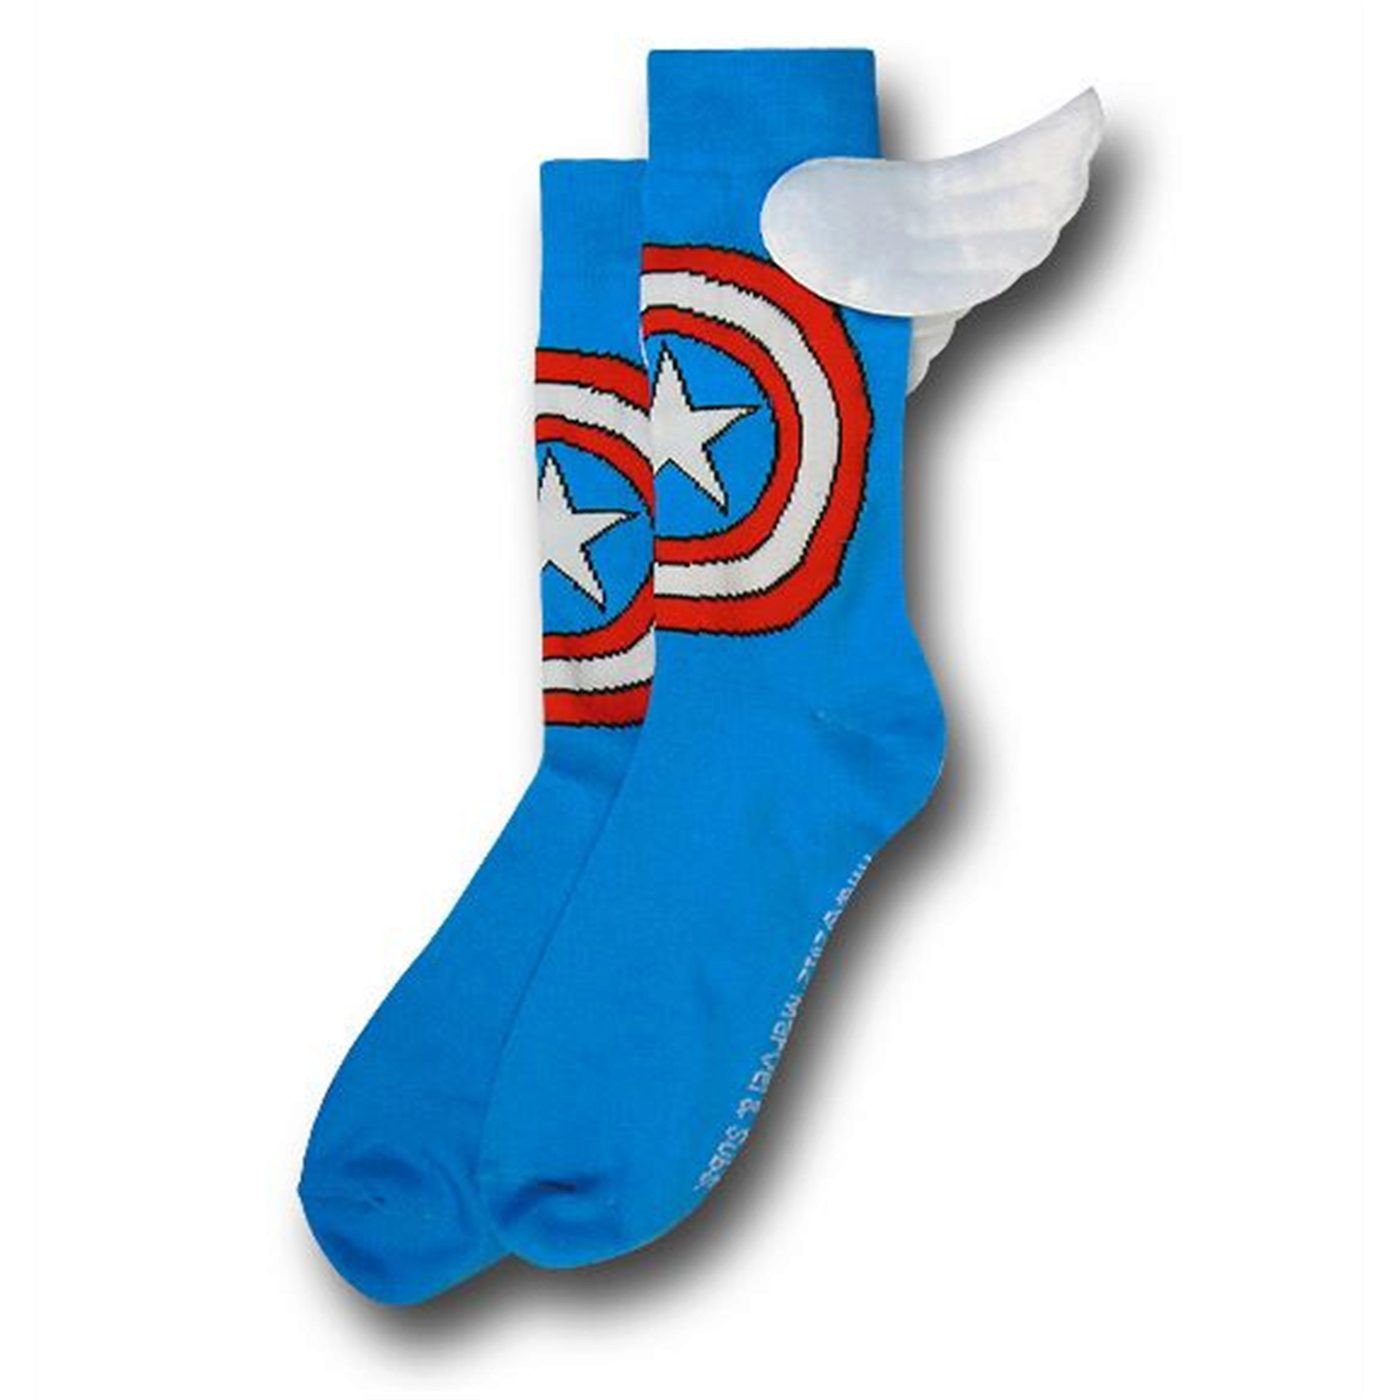 Captain America Crew Socks With Wings